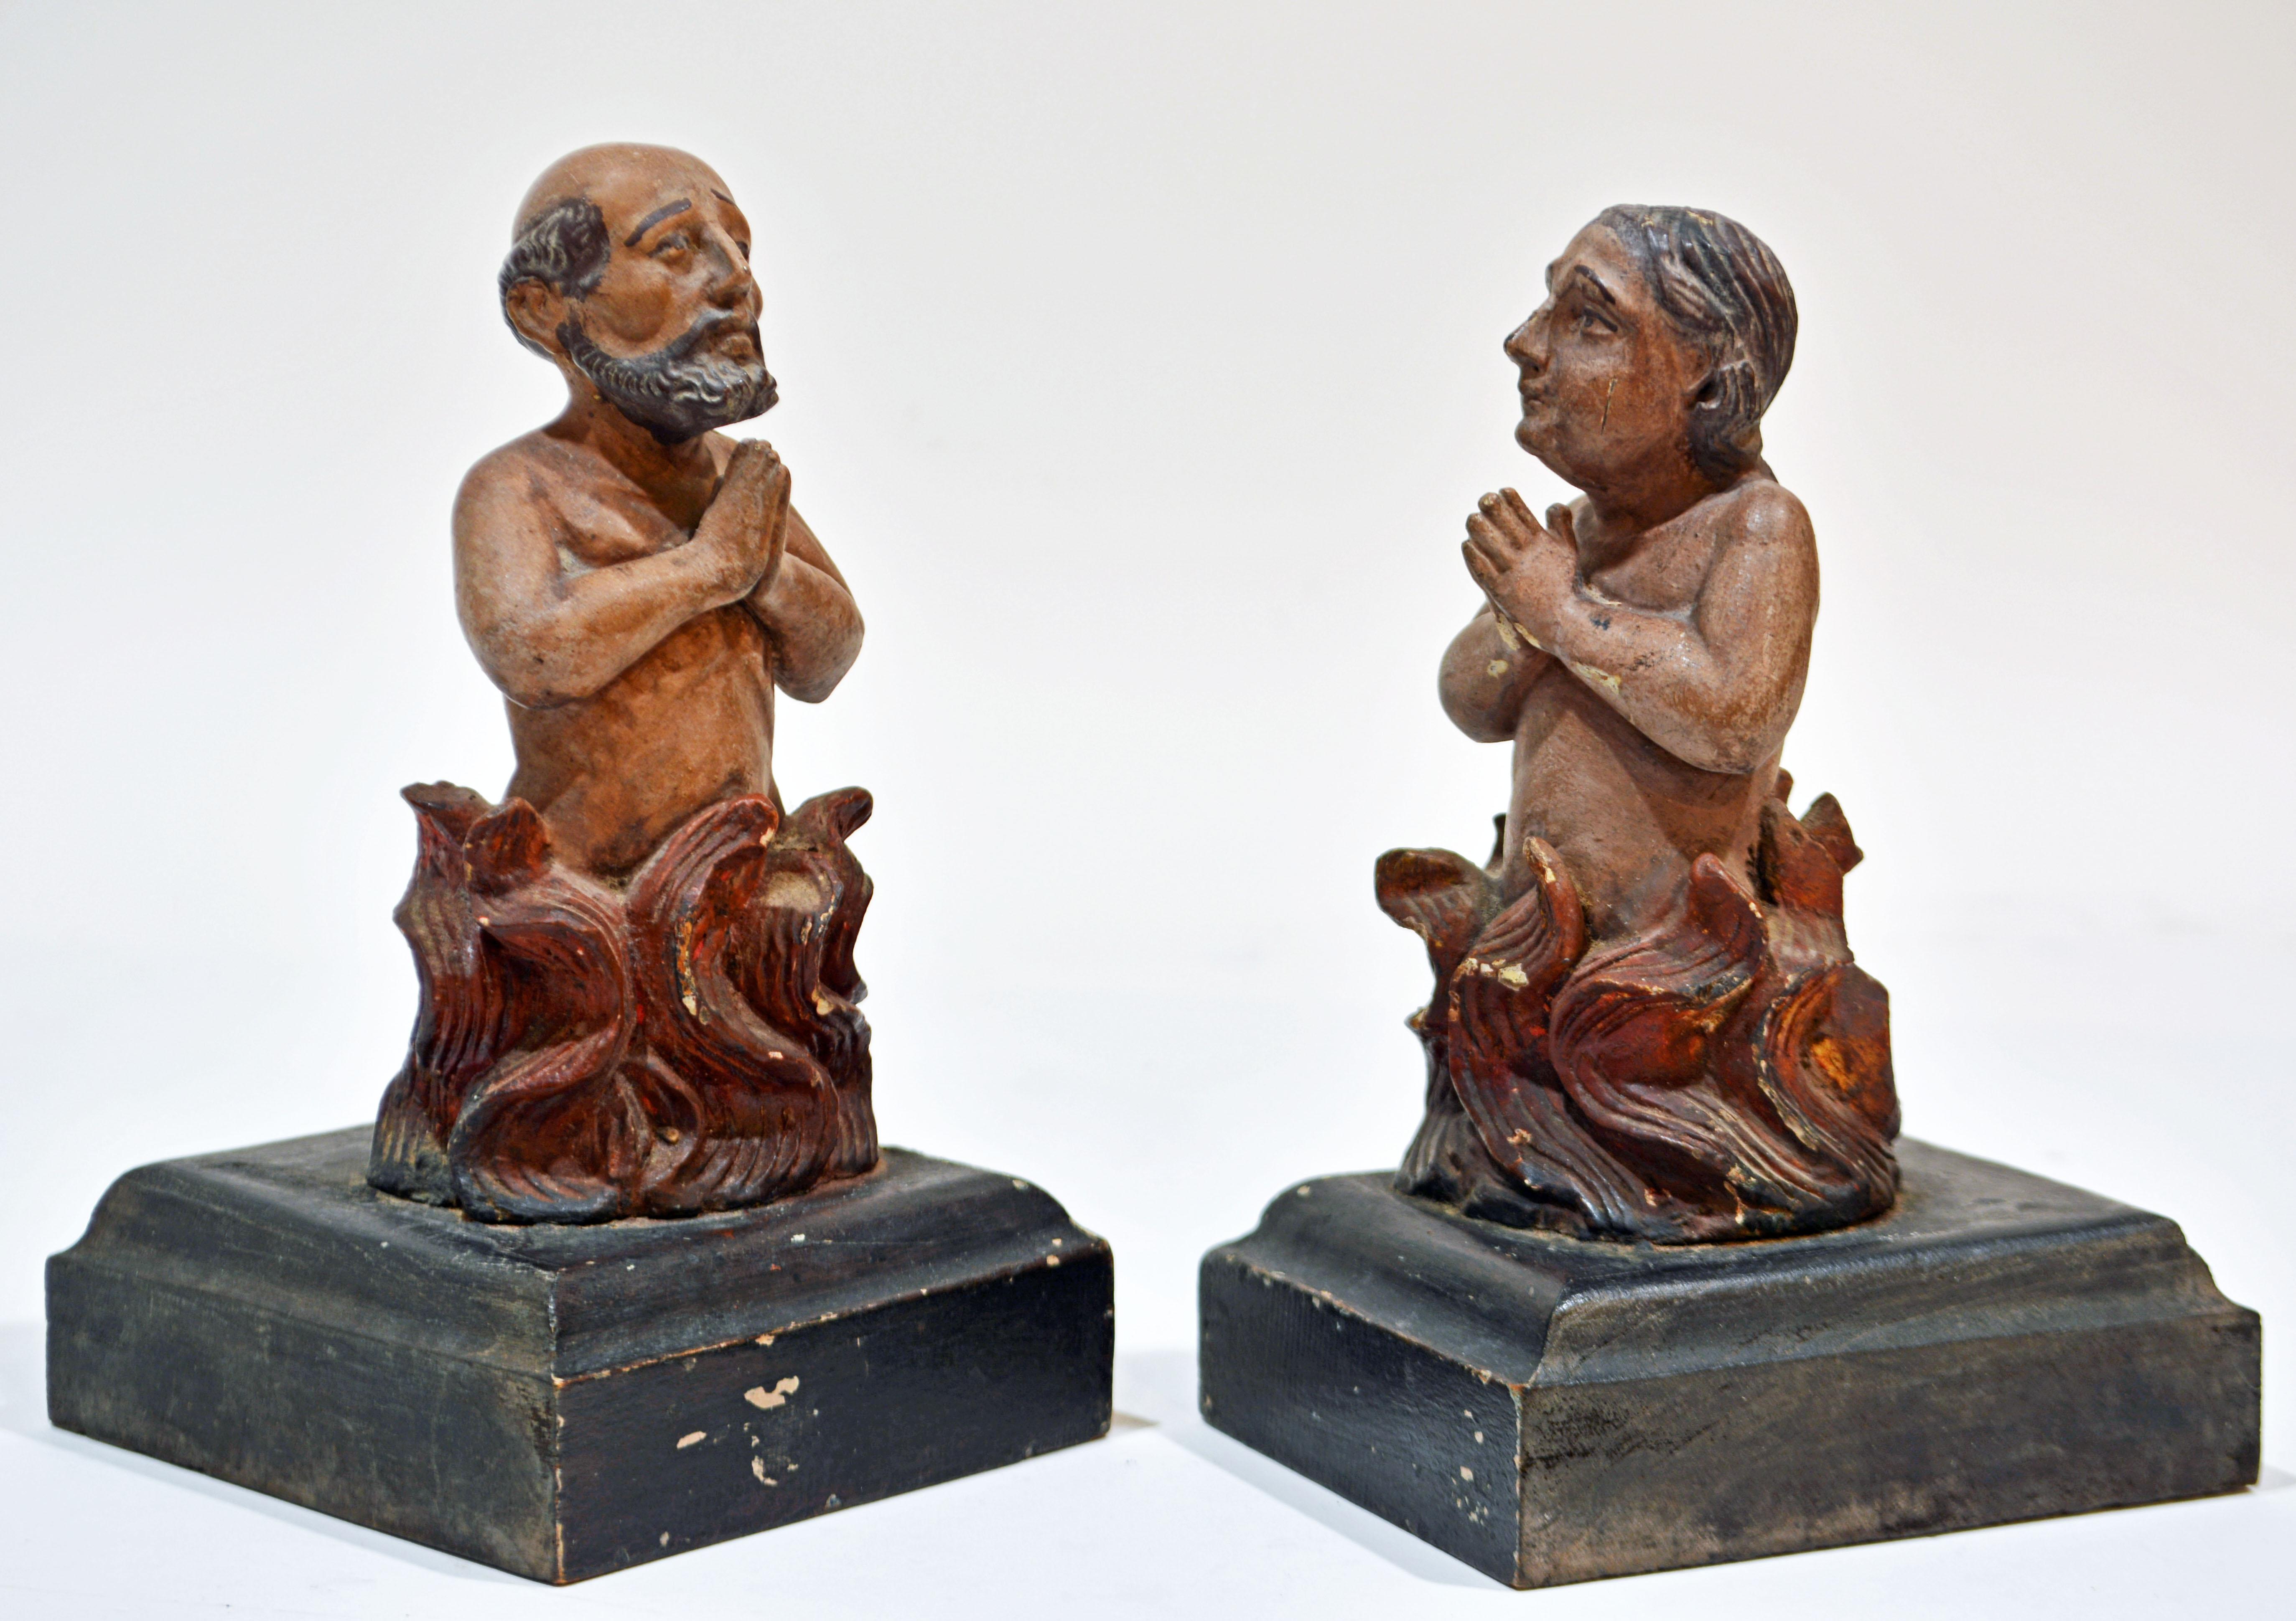 Dating to the early 19th century these small 'Anima Sola' ('Lonely Souls') carved and polychrome painted figures depict a man and a woman engulfed in the flames of Purgatory. Their faces are beautifully individualized and the figures express both